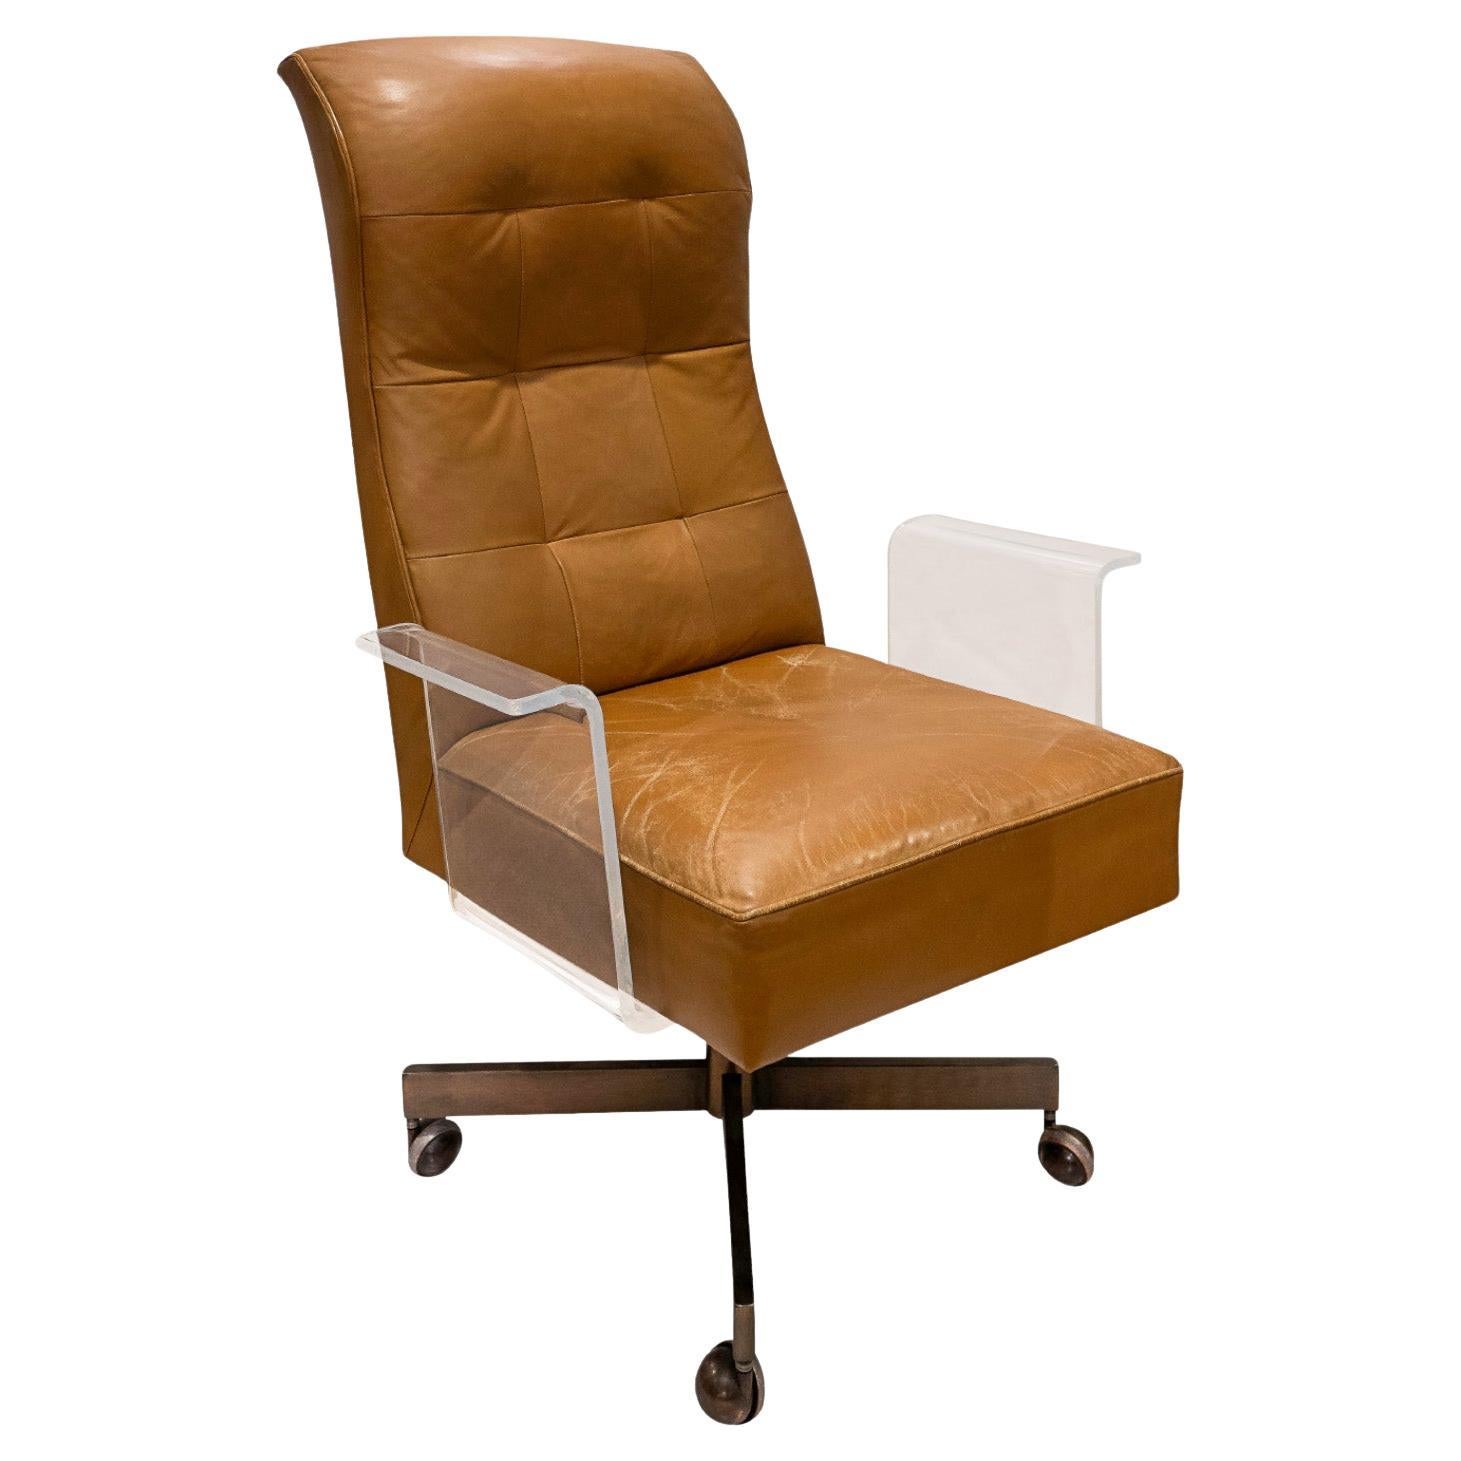 Vladimir Kagan Rare "Luxus Executive Chair" with Lucite Arms 1970s (Signed) For Sale